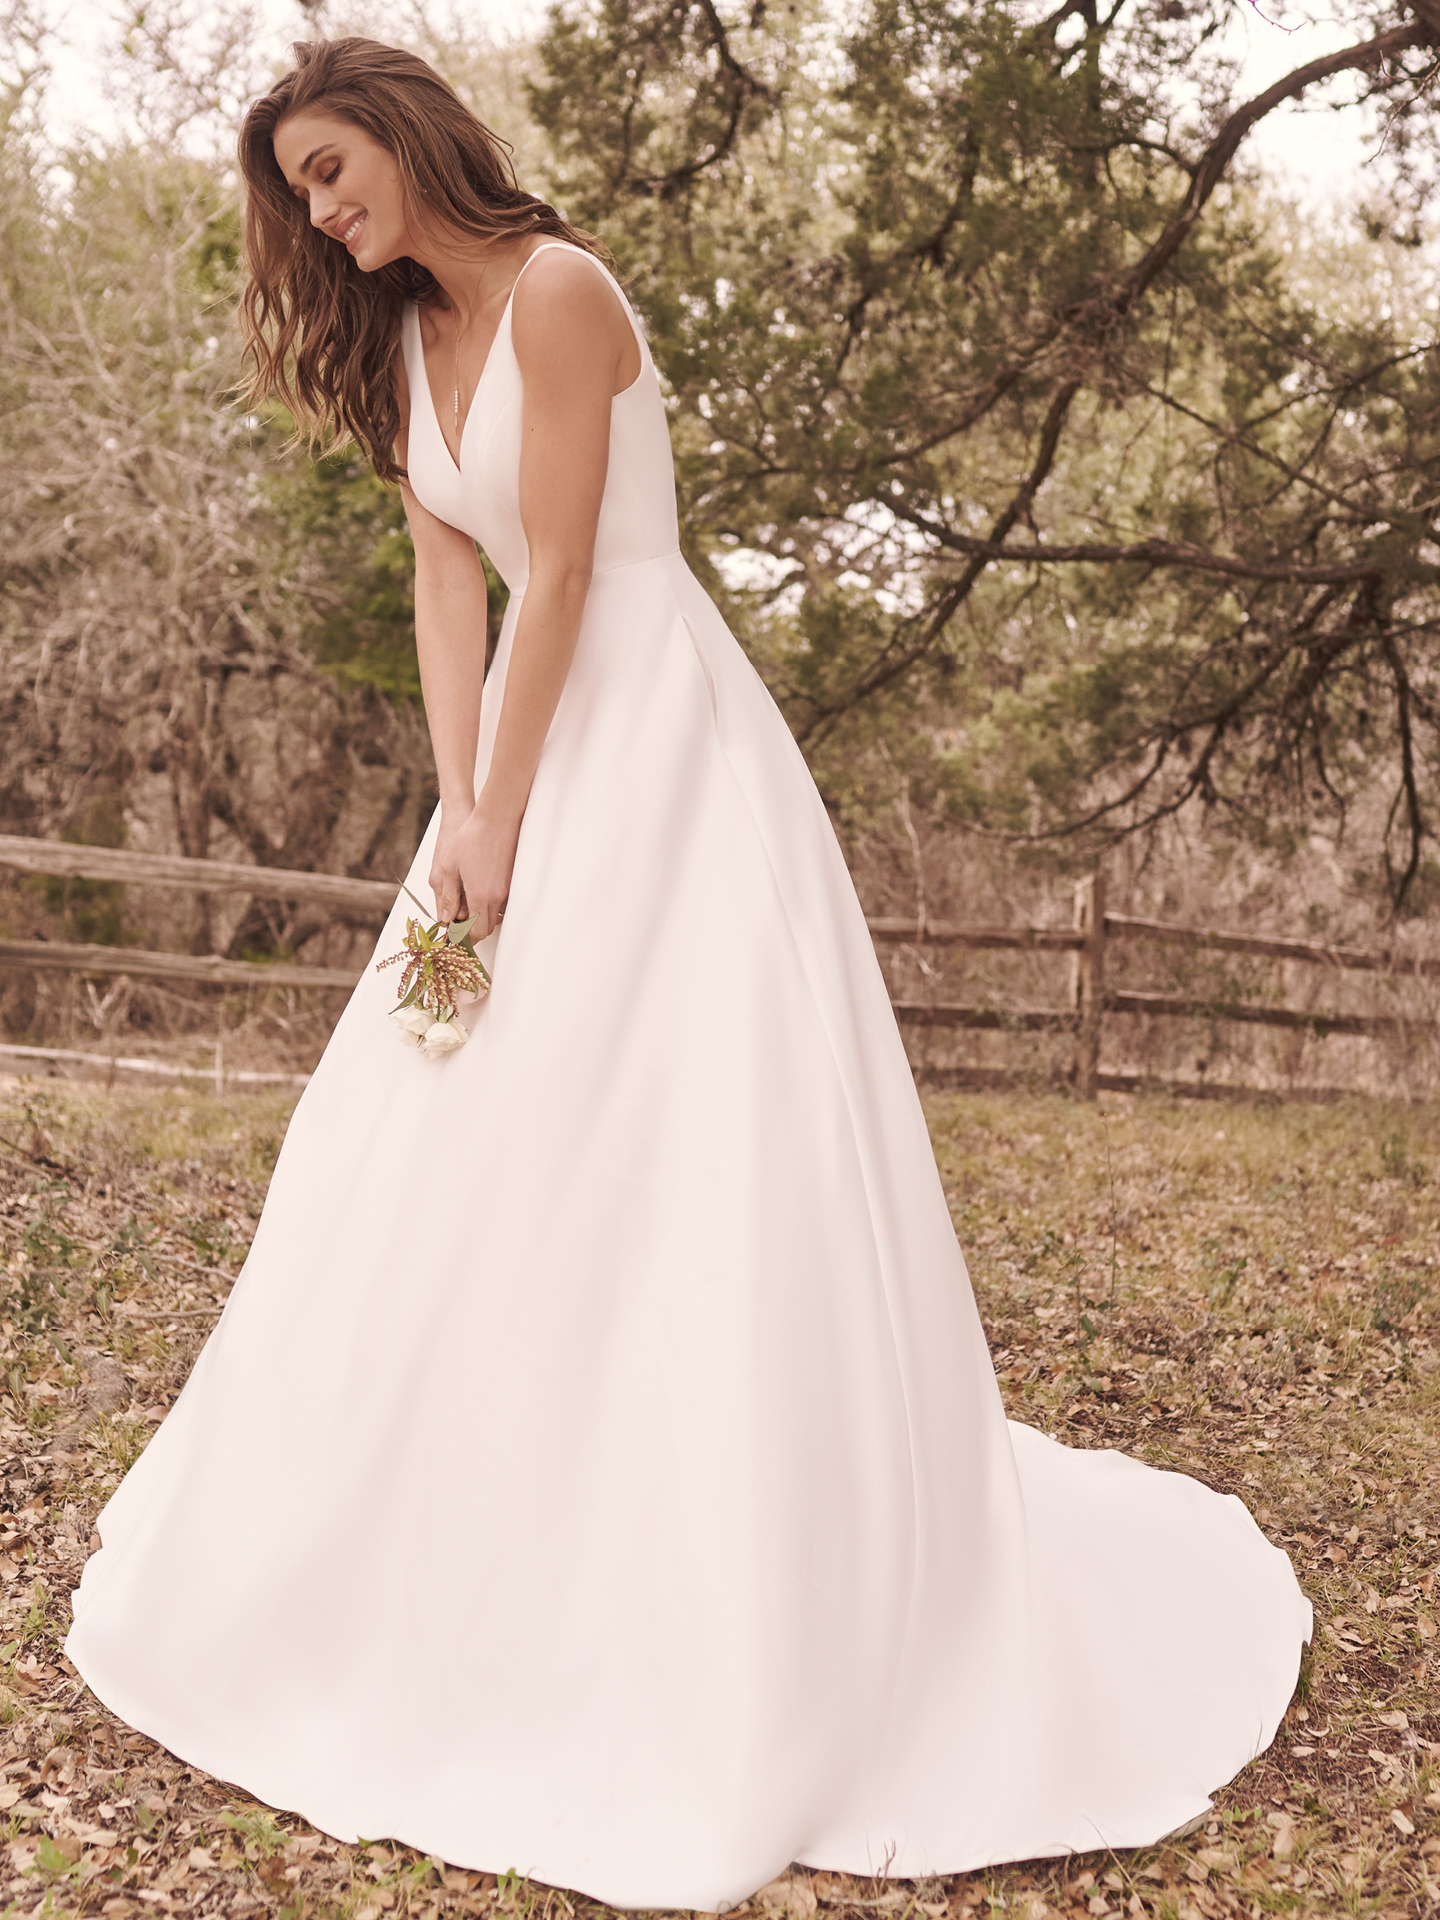 Bride Wearing Simple A-Line Wedding Dress Called Paxton By Maggie Sottero